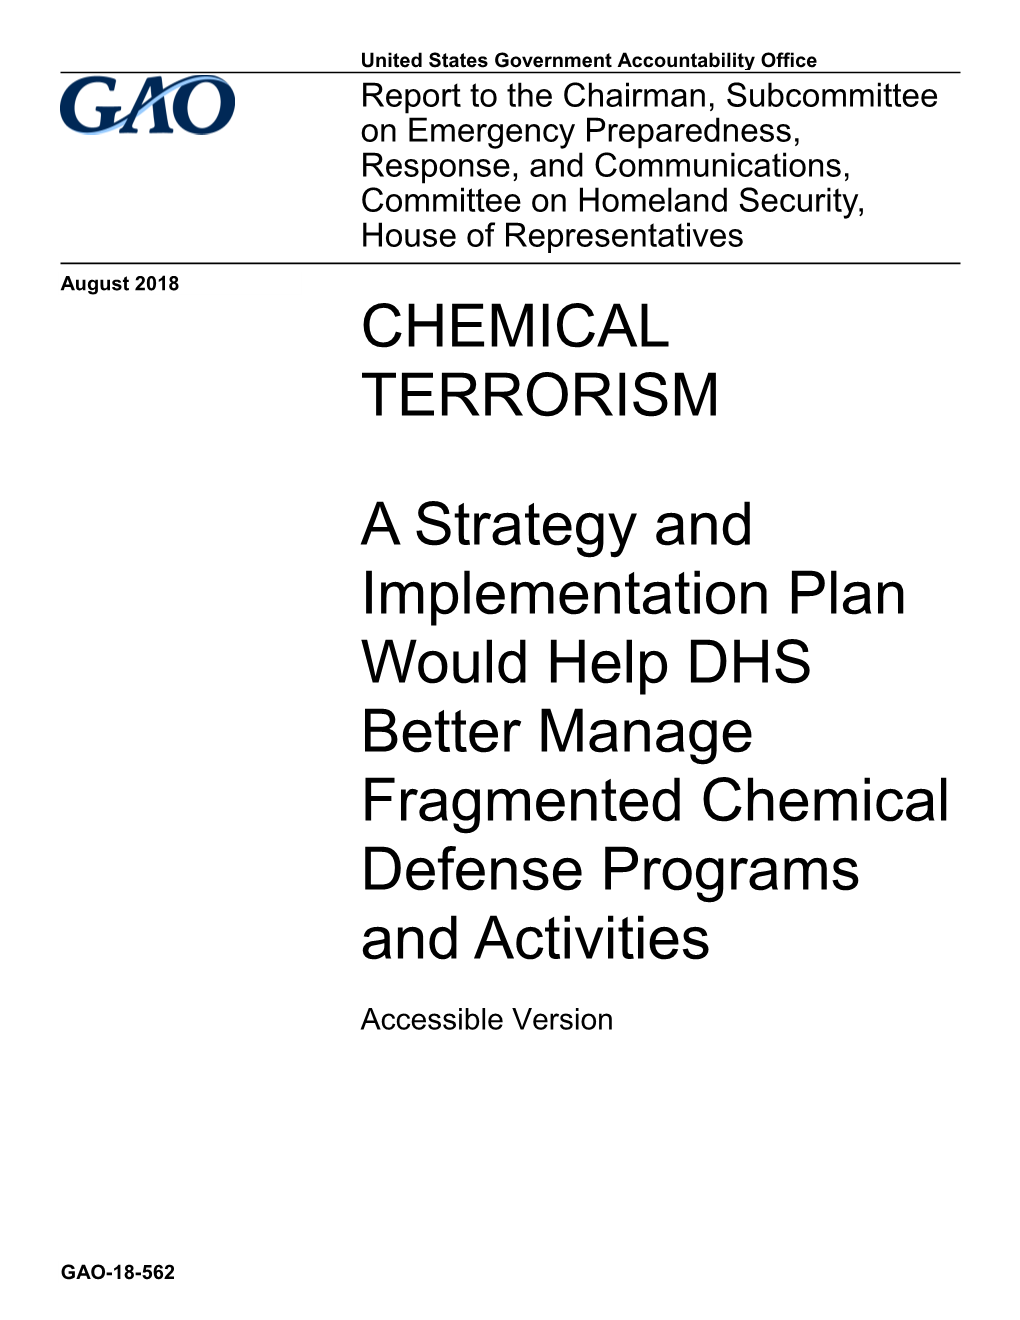 GAO-18-562, Accessible Version, CHEMICAL TERRORISM: A